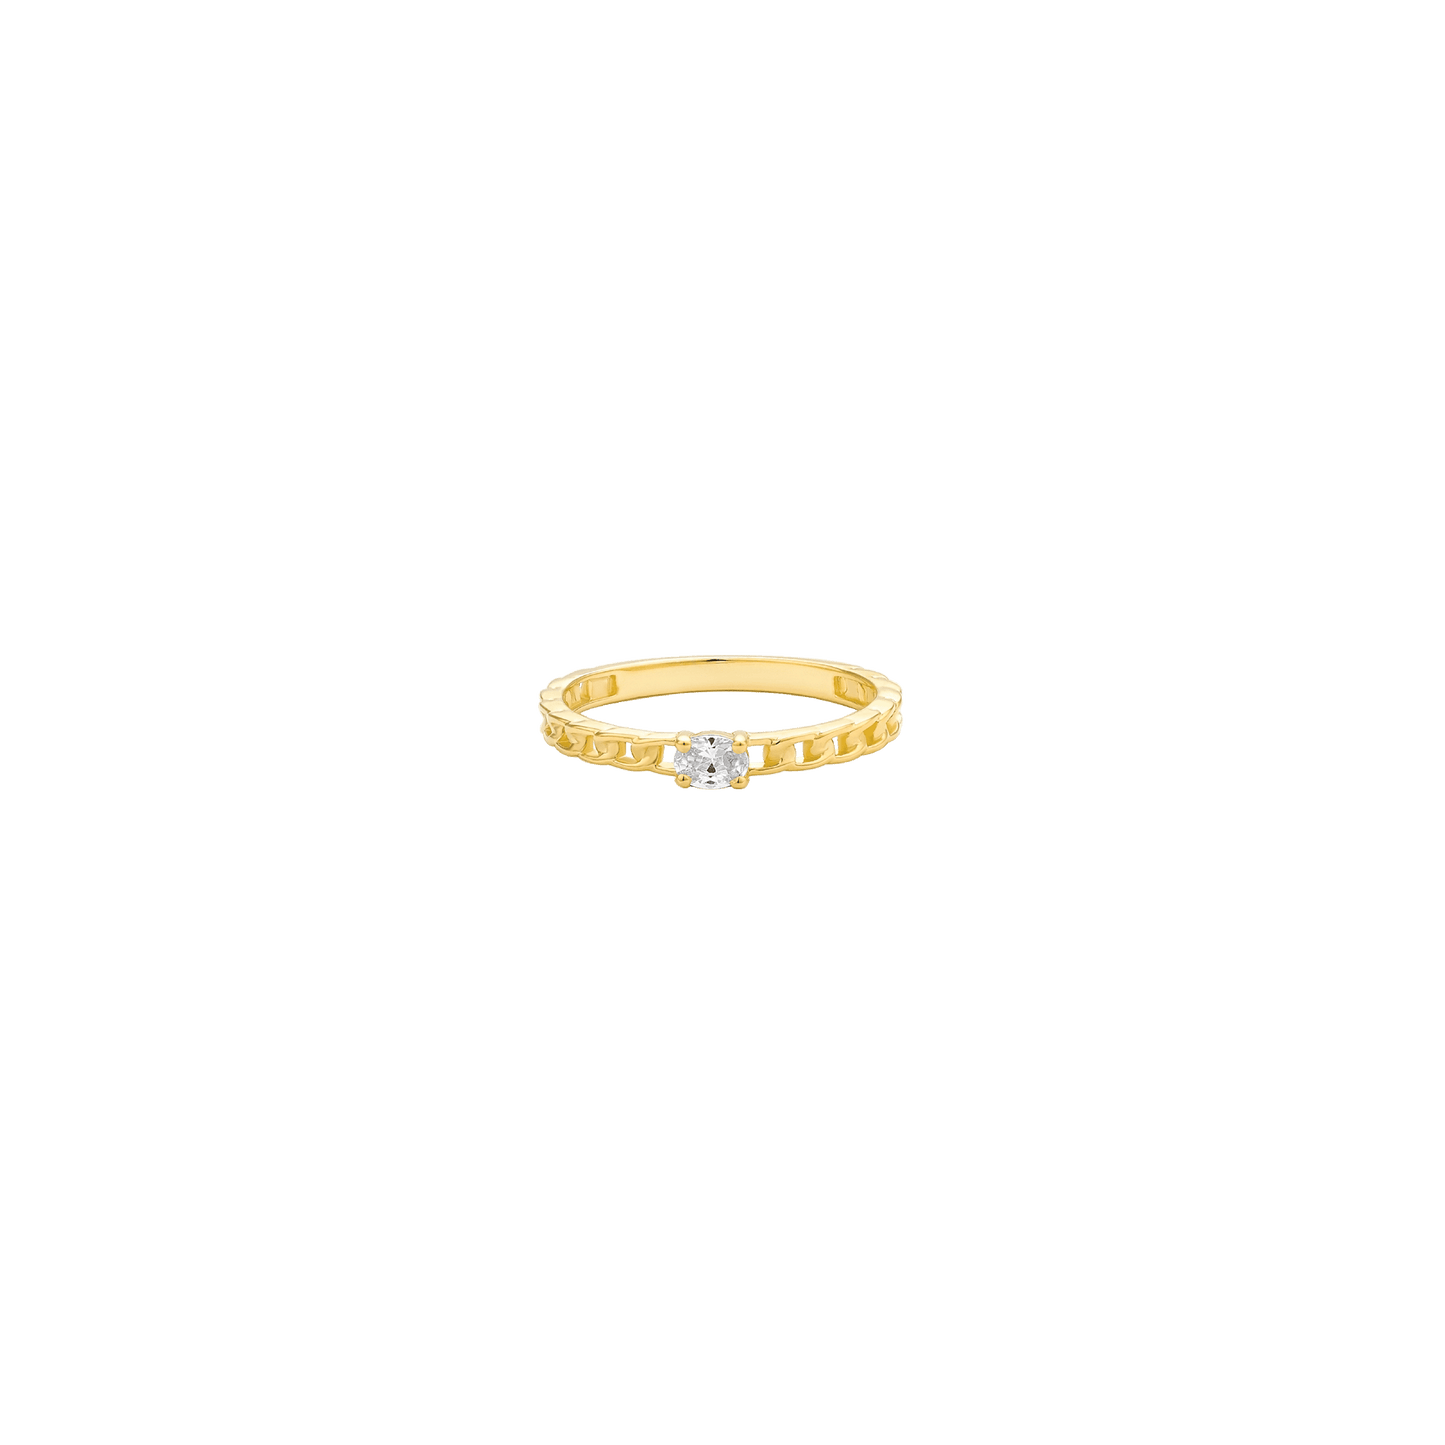 Marquise Diamond Solid Chain Ring - 14K Yellow Gold Rings 14K Solid Gold US 4 